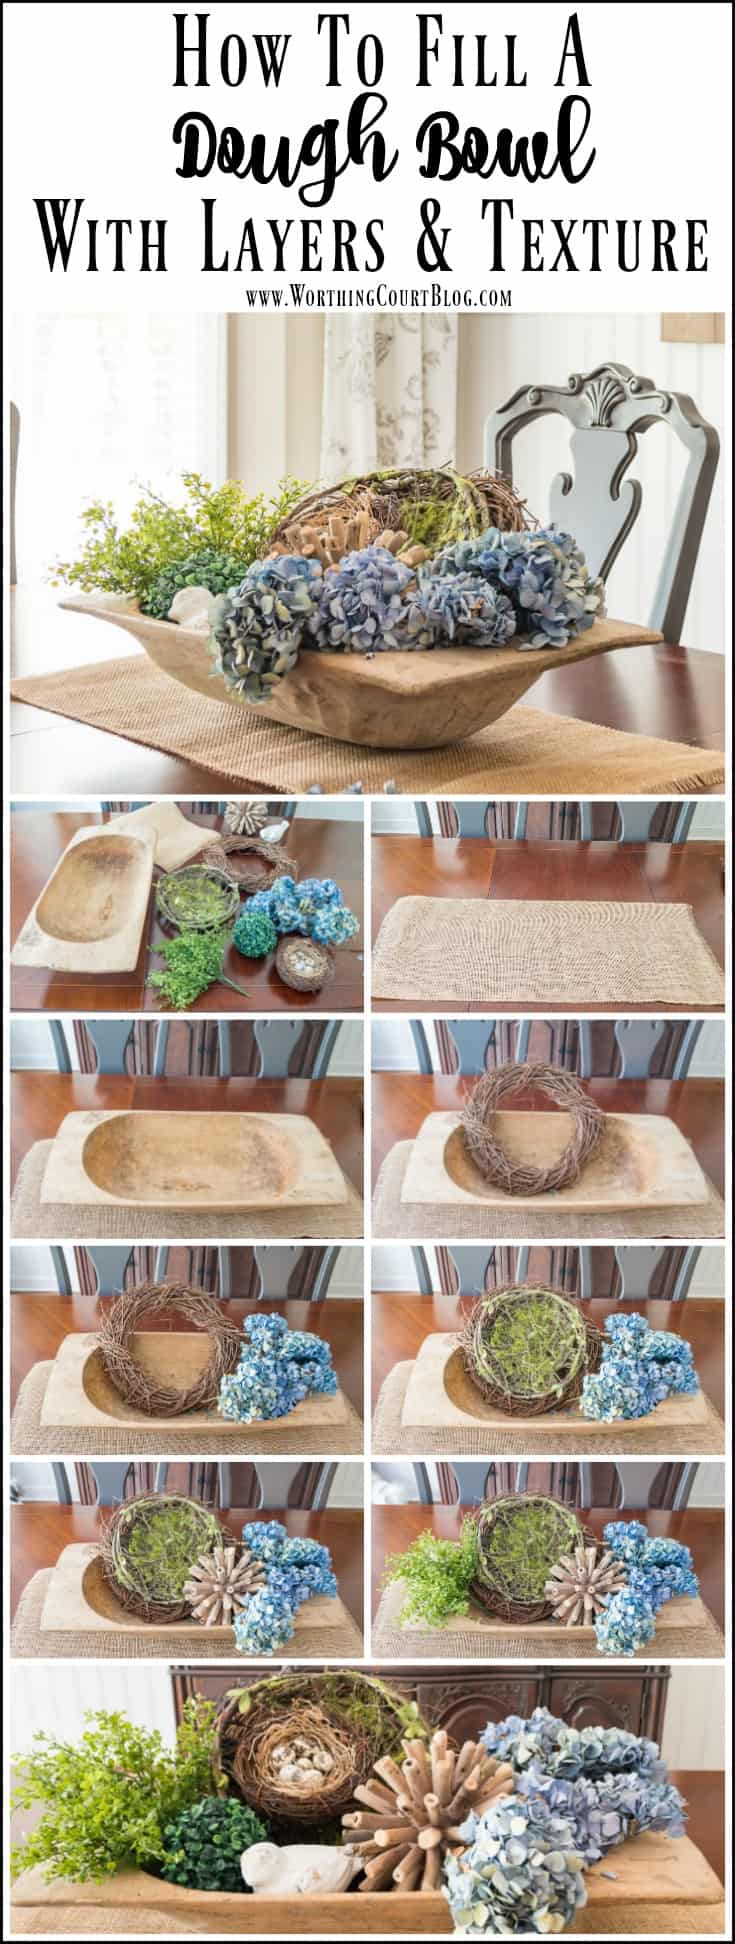 Step by step photos of how to create a seasonal dough bowl display.